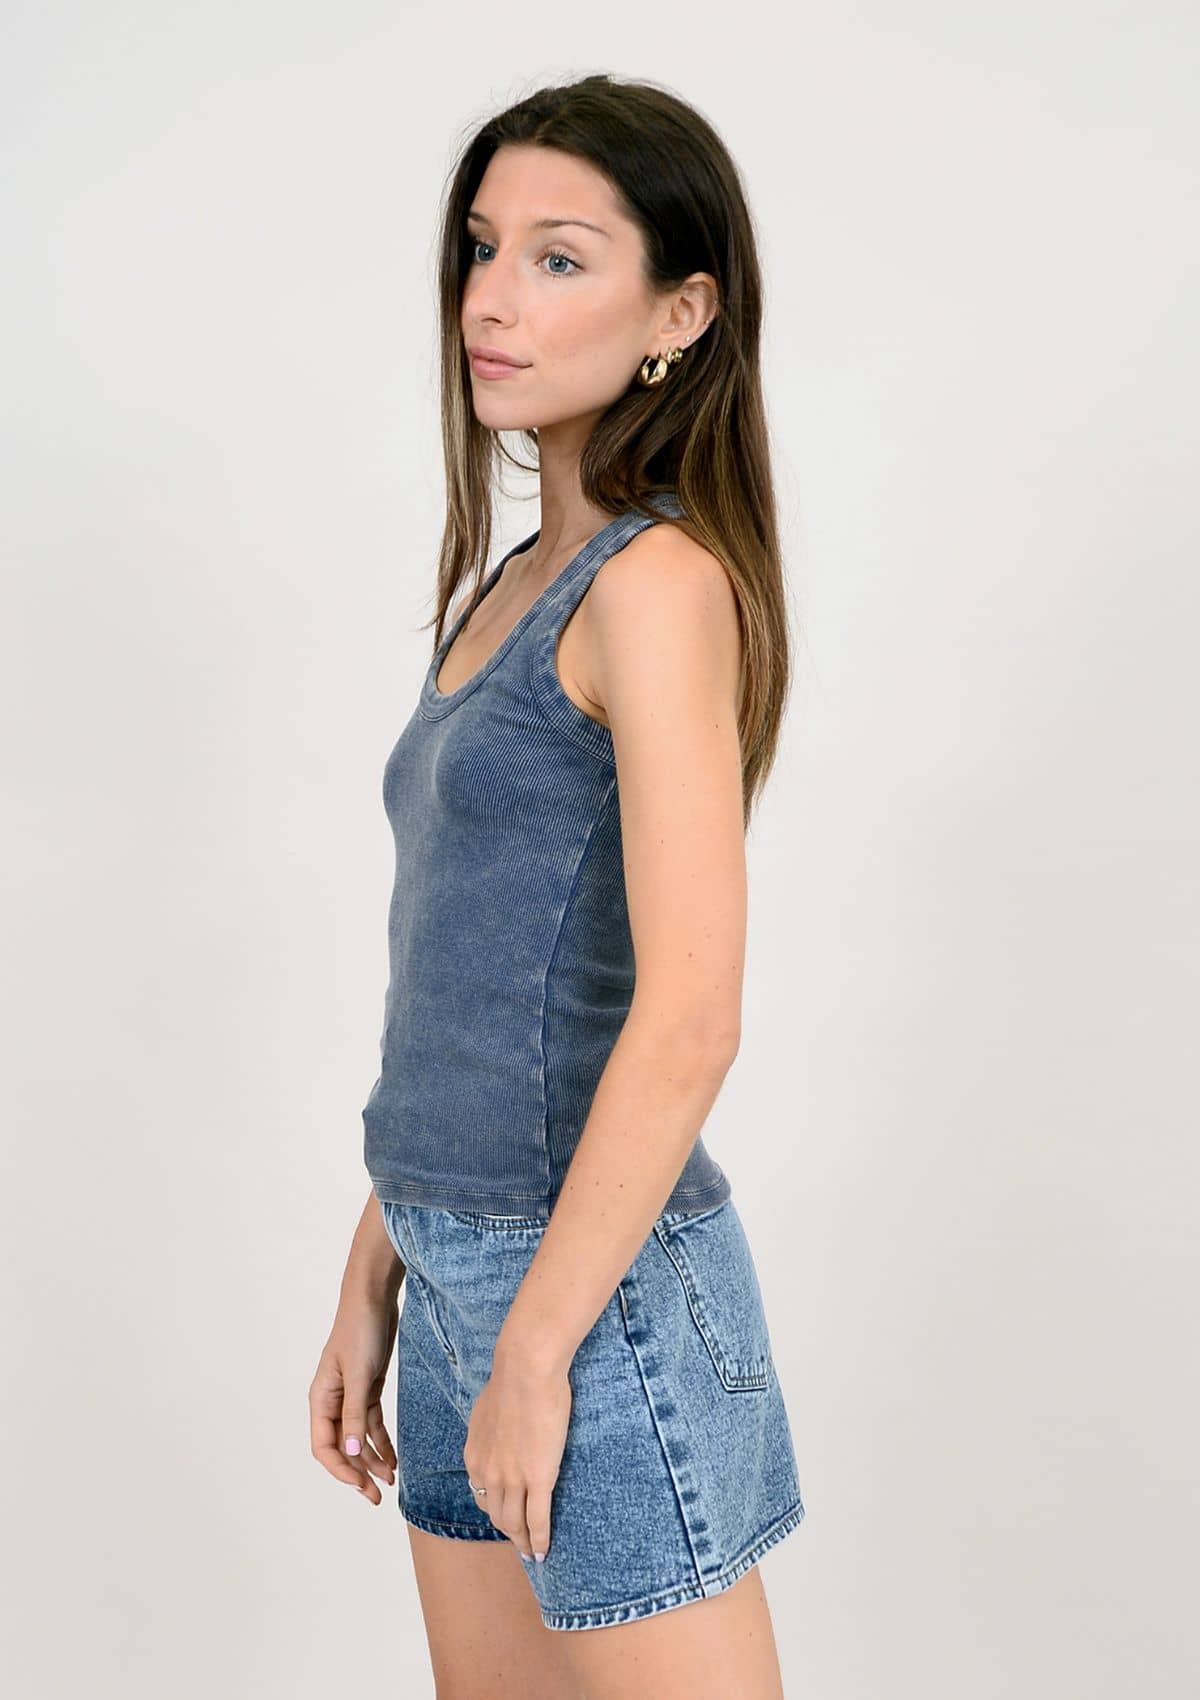 Scoop neck. Paired with high rise blue jeans.